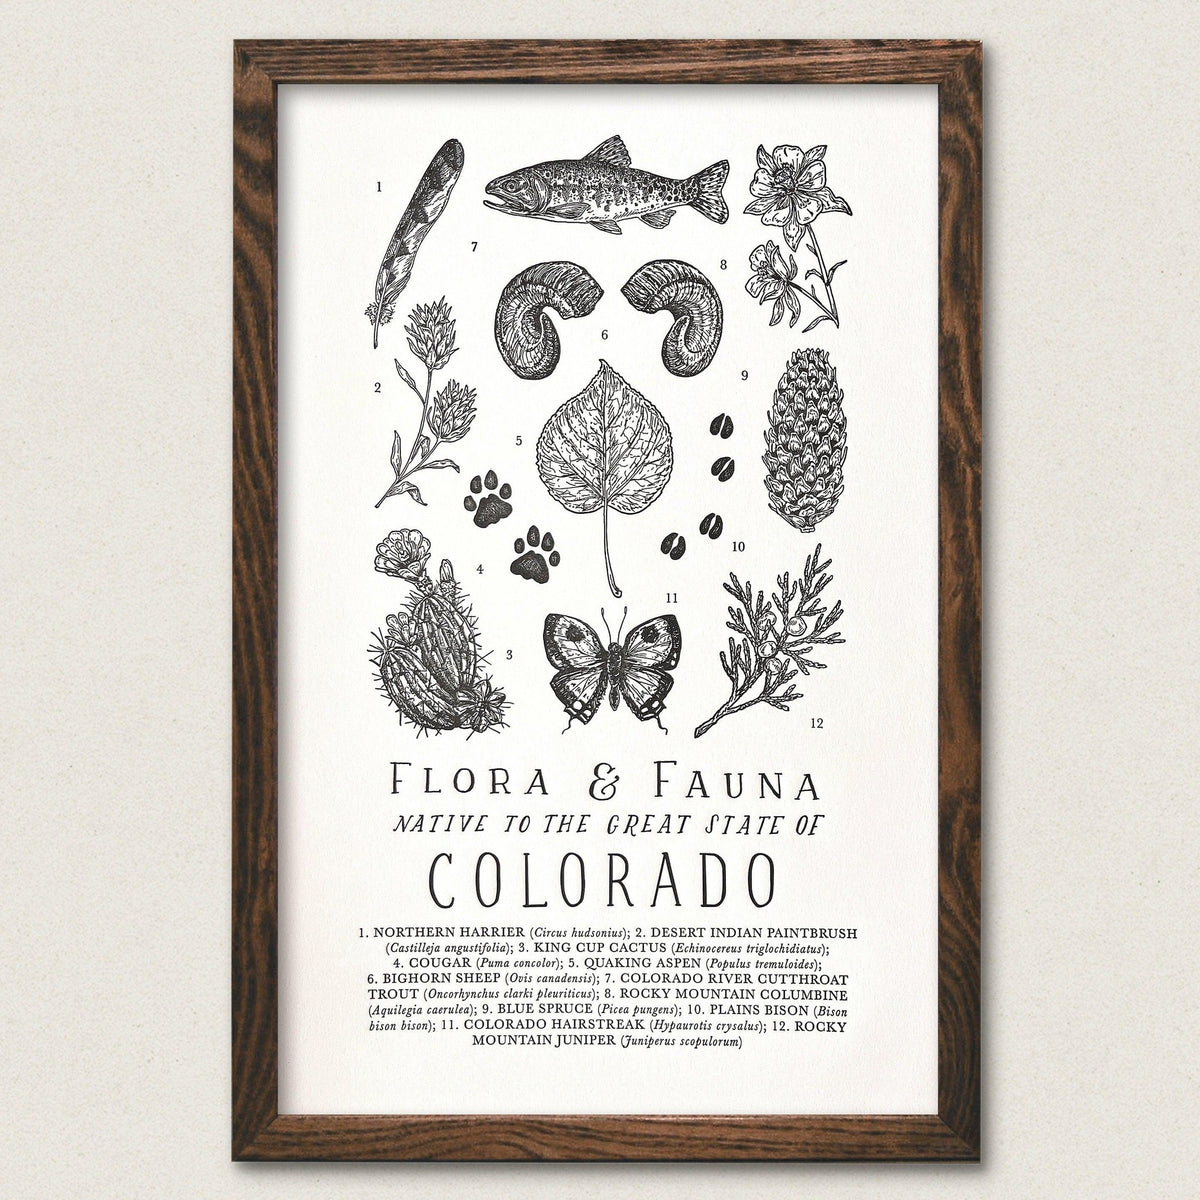 A Colorado Field Guide Letterpress Print by The Wild Wander featuring various plants and animals.